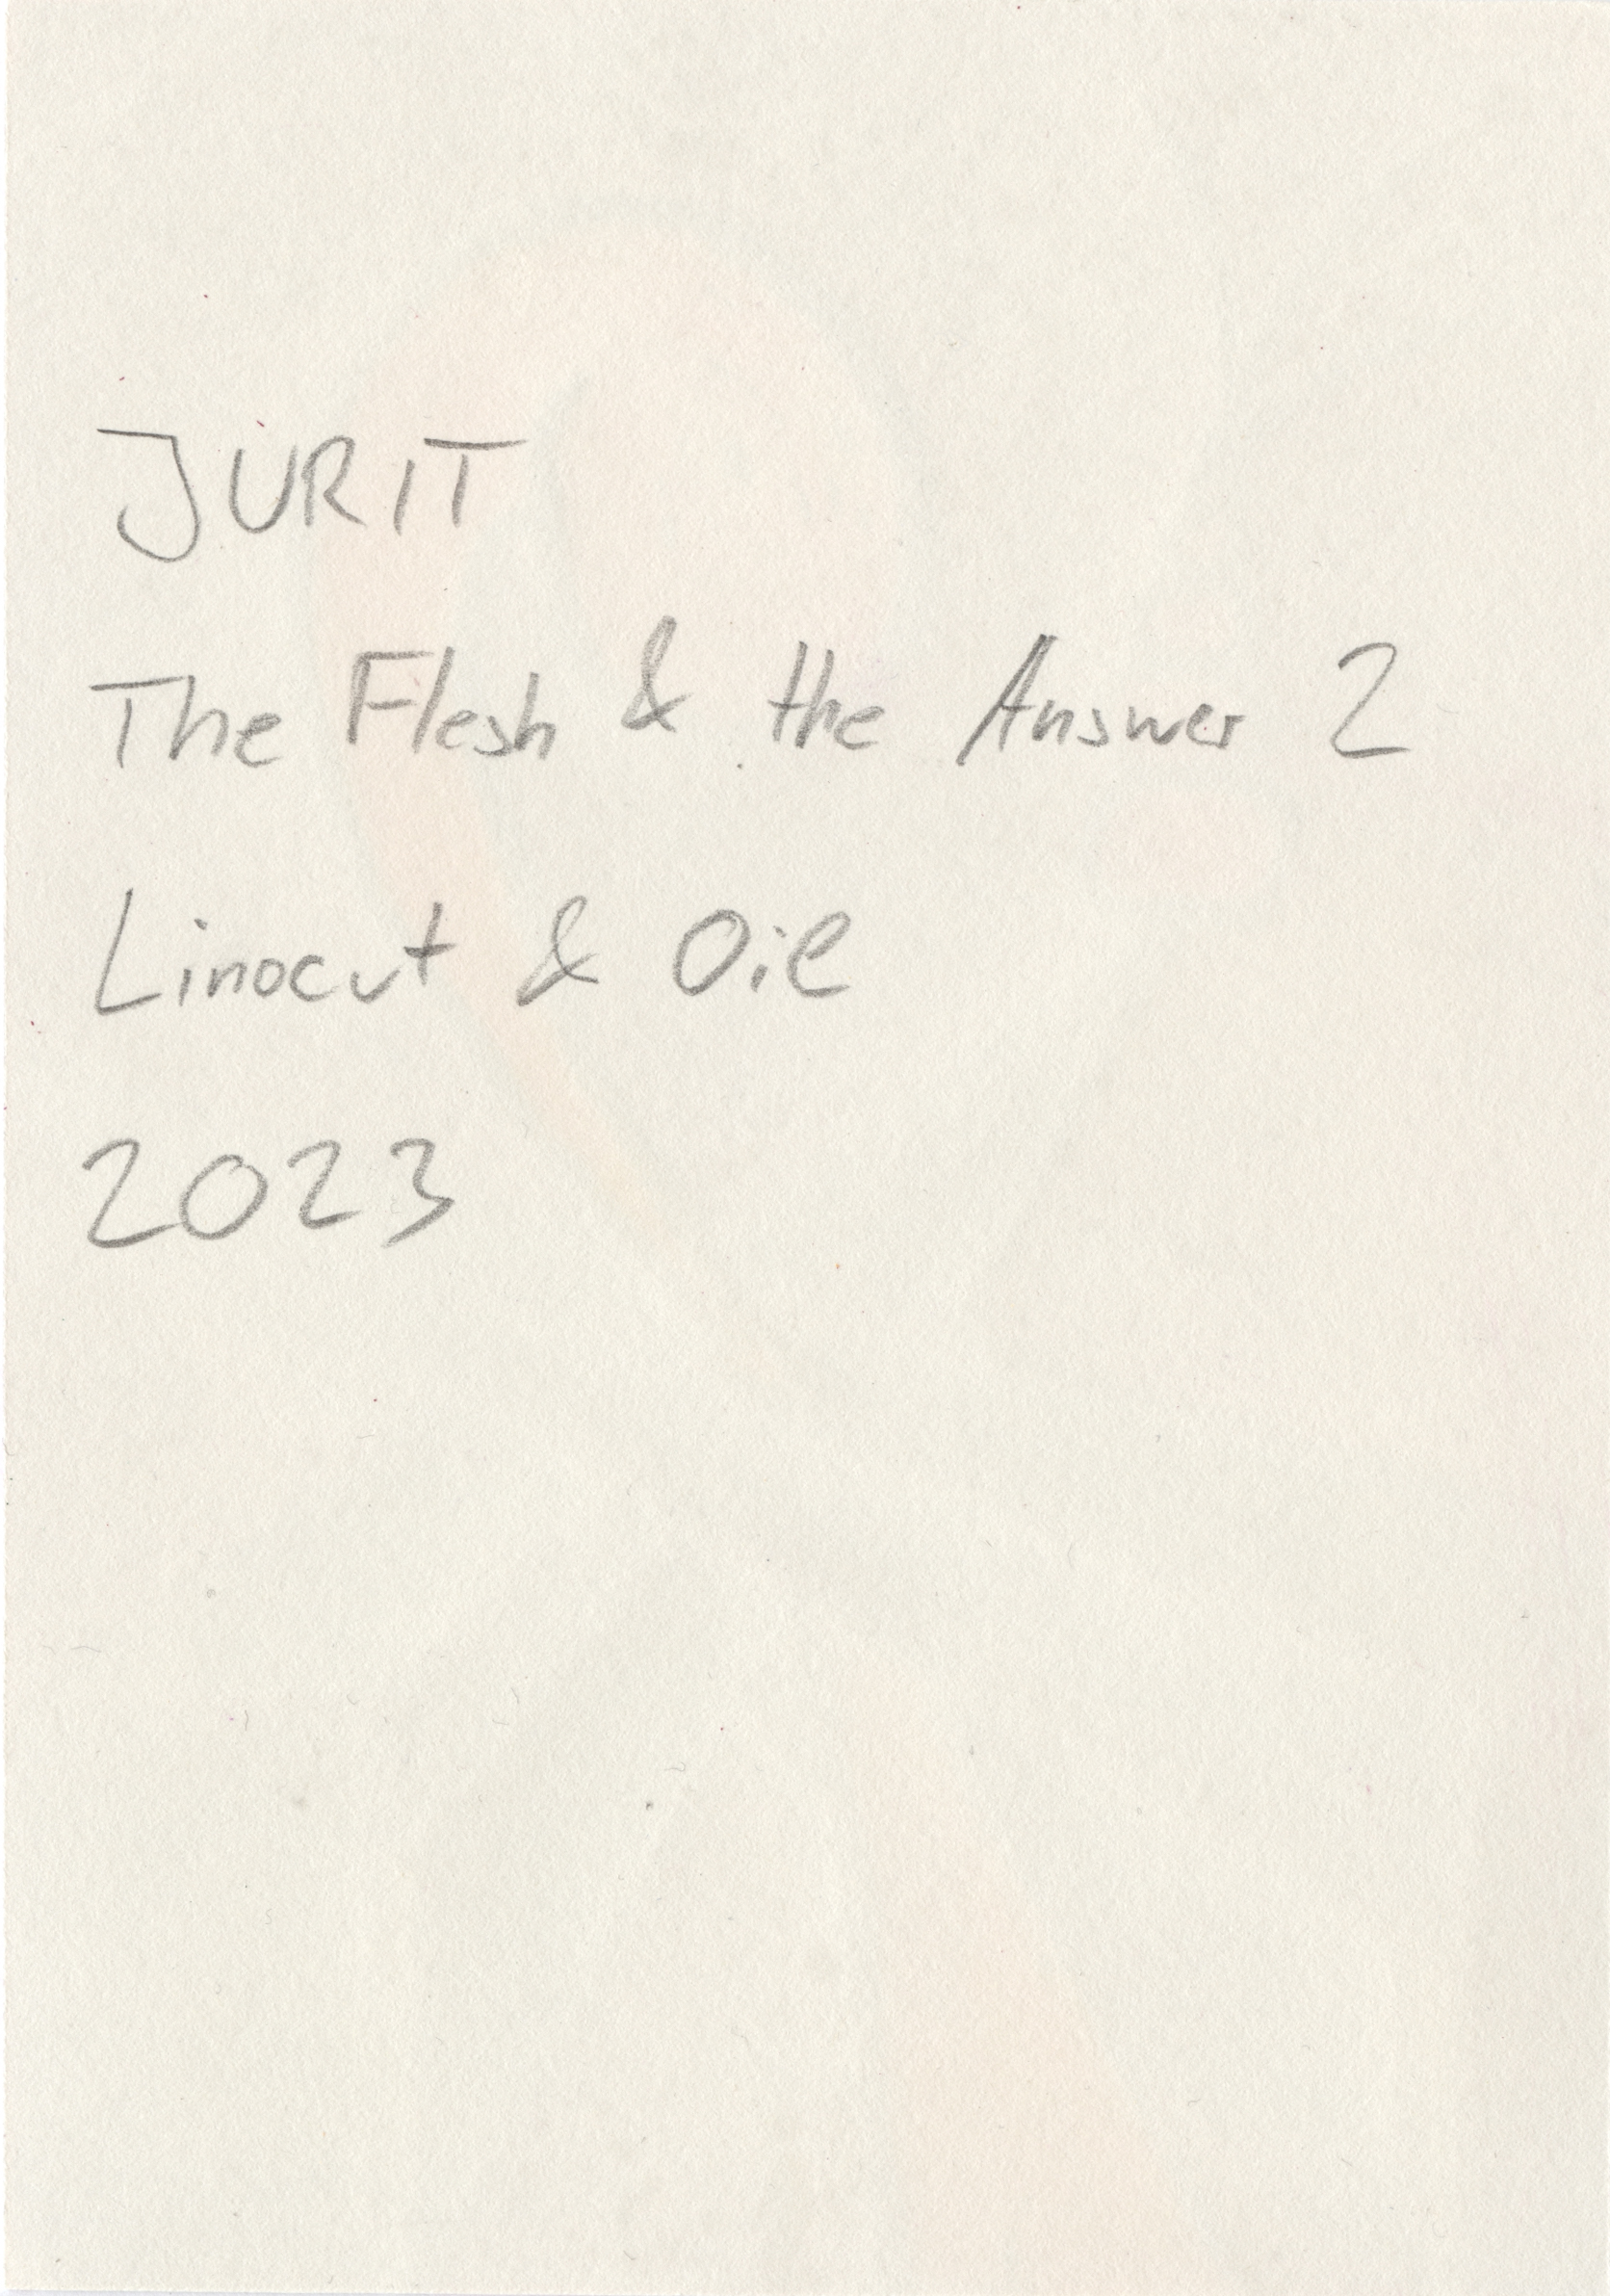 21. JURIT - The Flesh the Answer 2 BACK